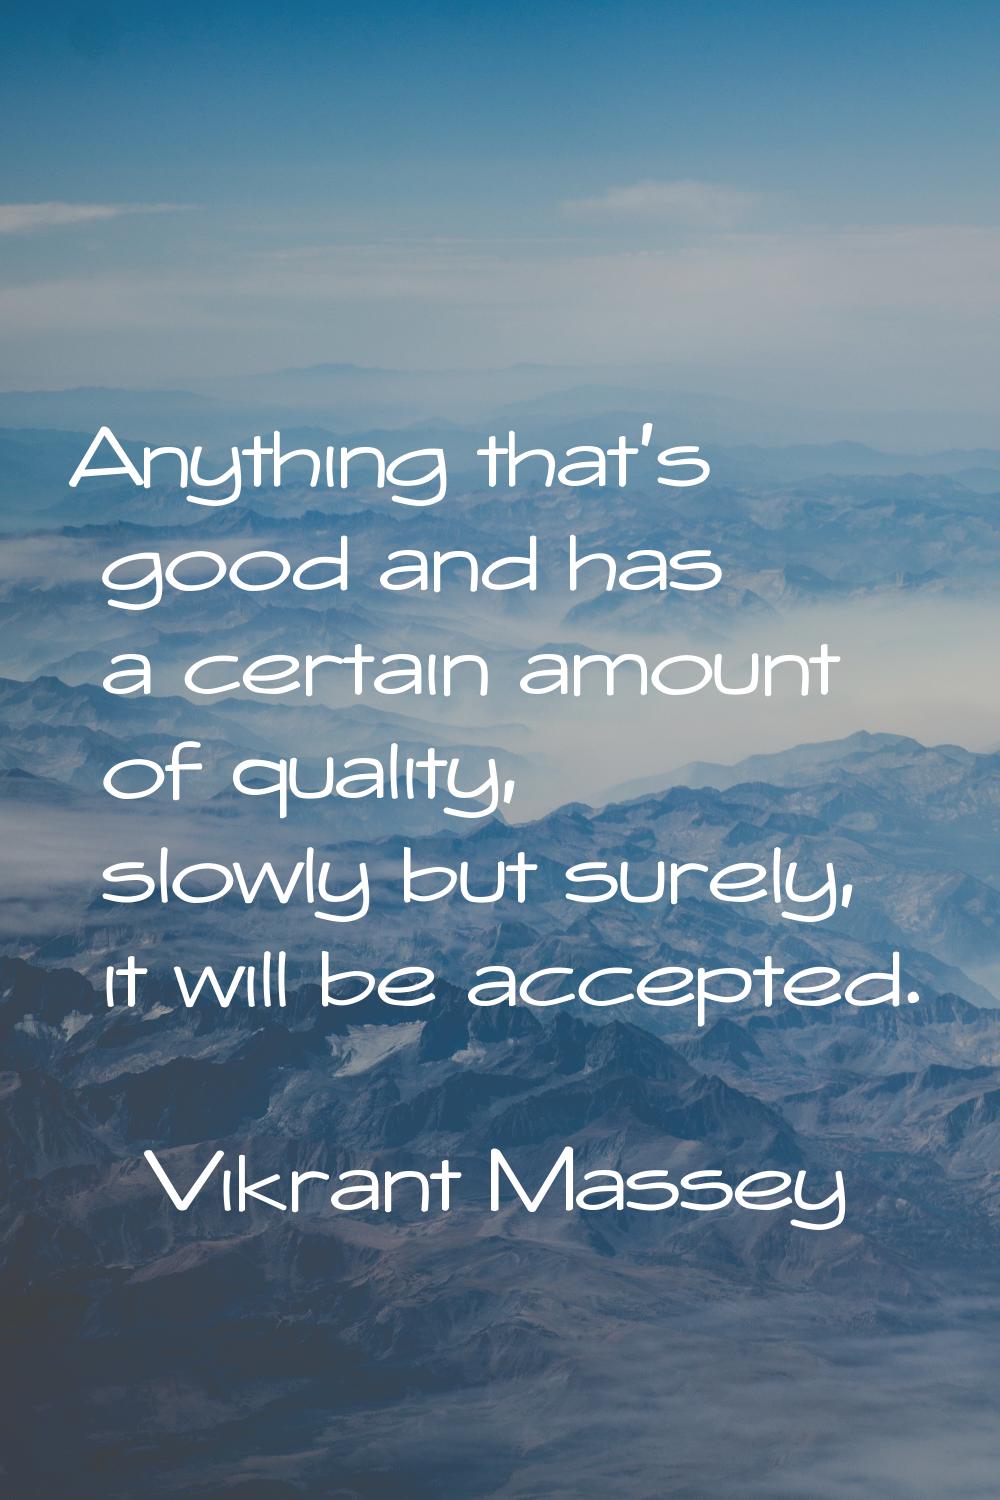 Anything that's good and has a certain amount of quality, slowly but surely, it will be accepted.